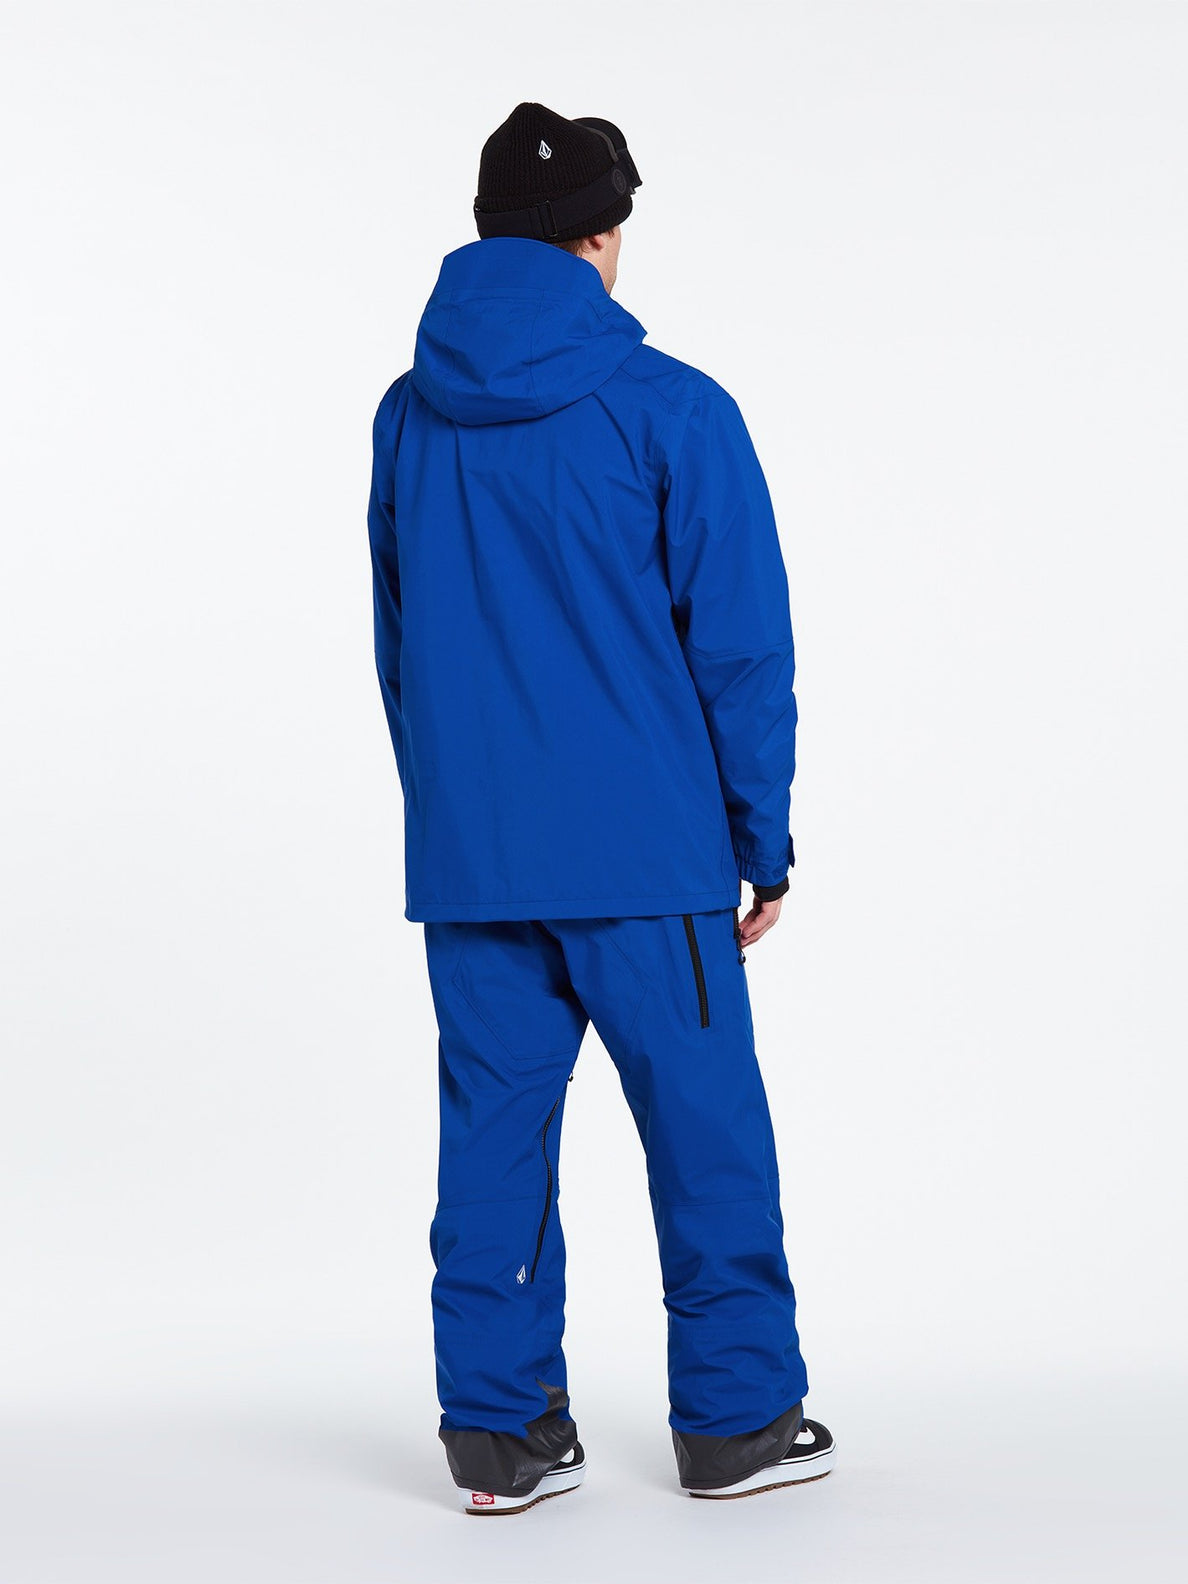 Guide Gore-Tex Jacket - BRIGHT BLUE (G0652202_BBL) [3]